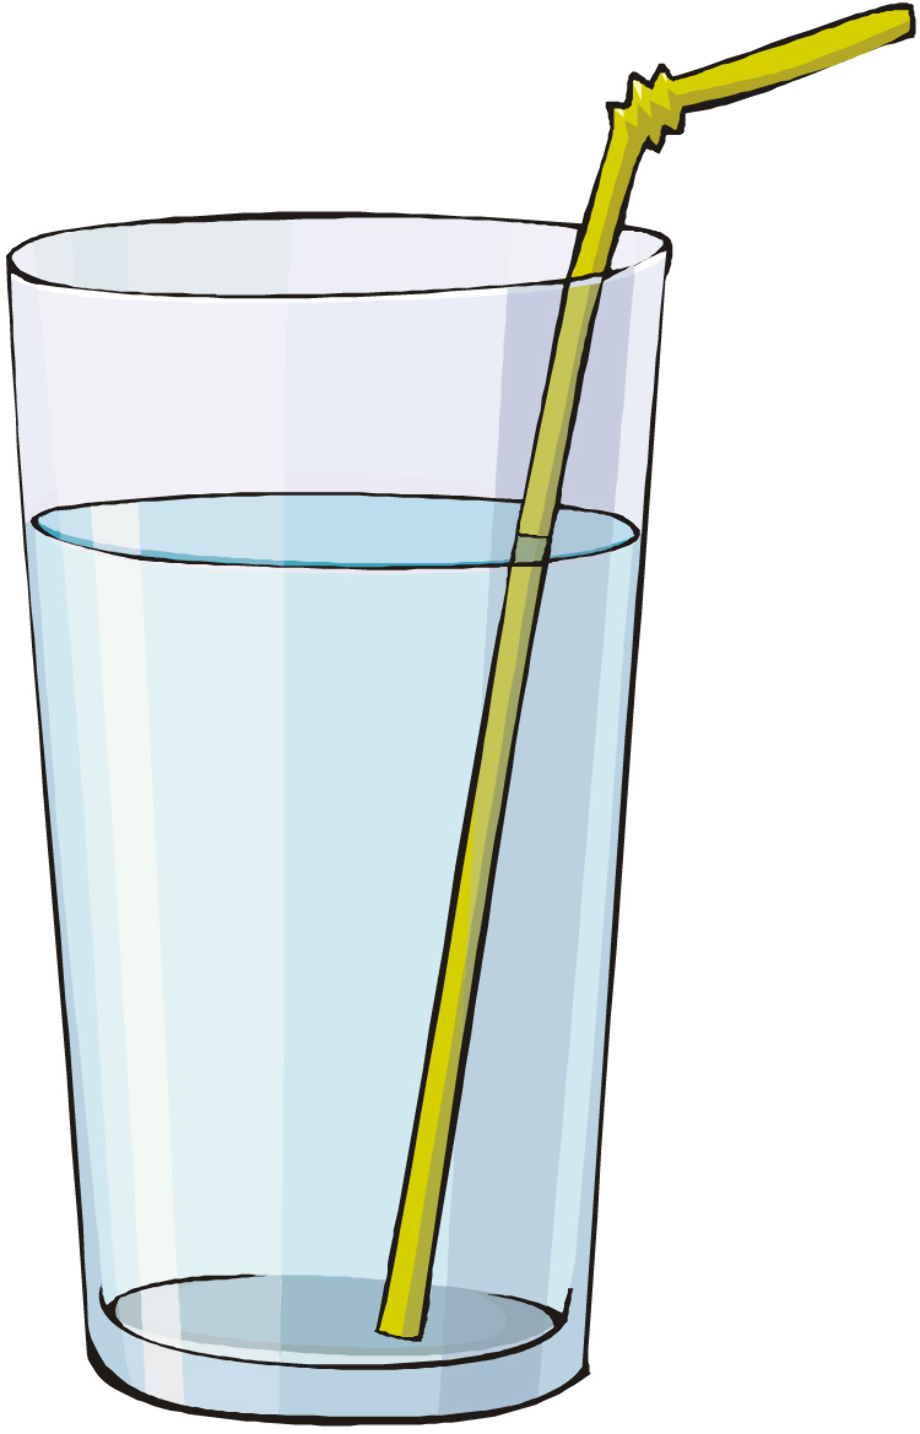 cup clipart glass